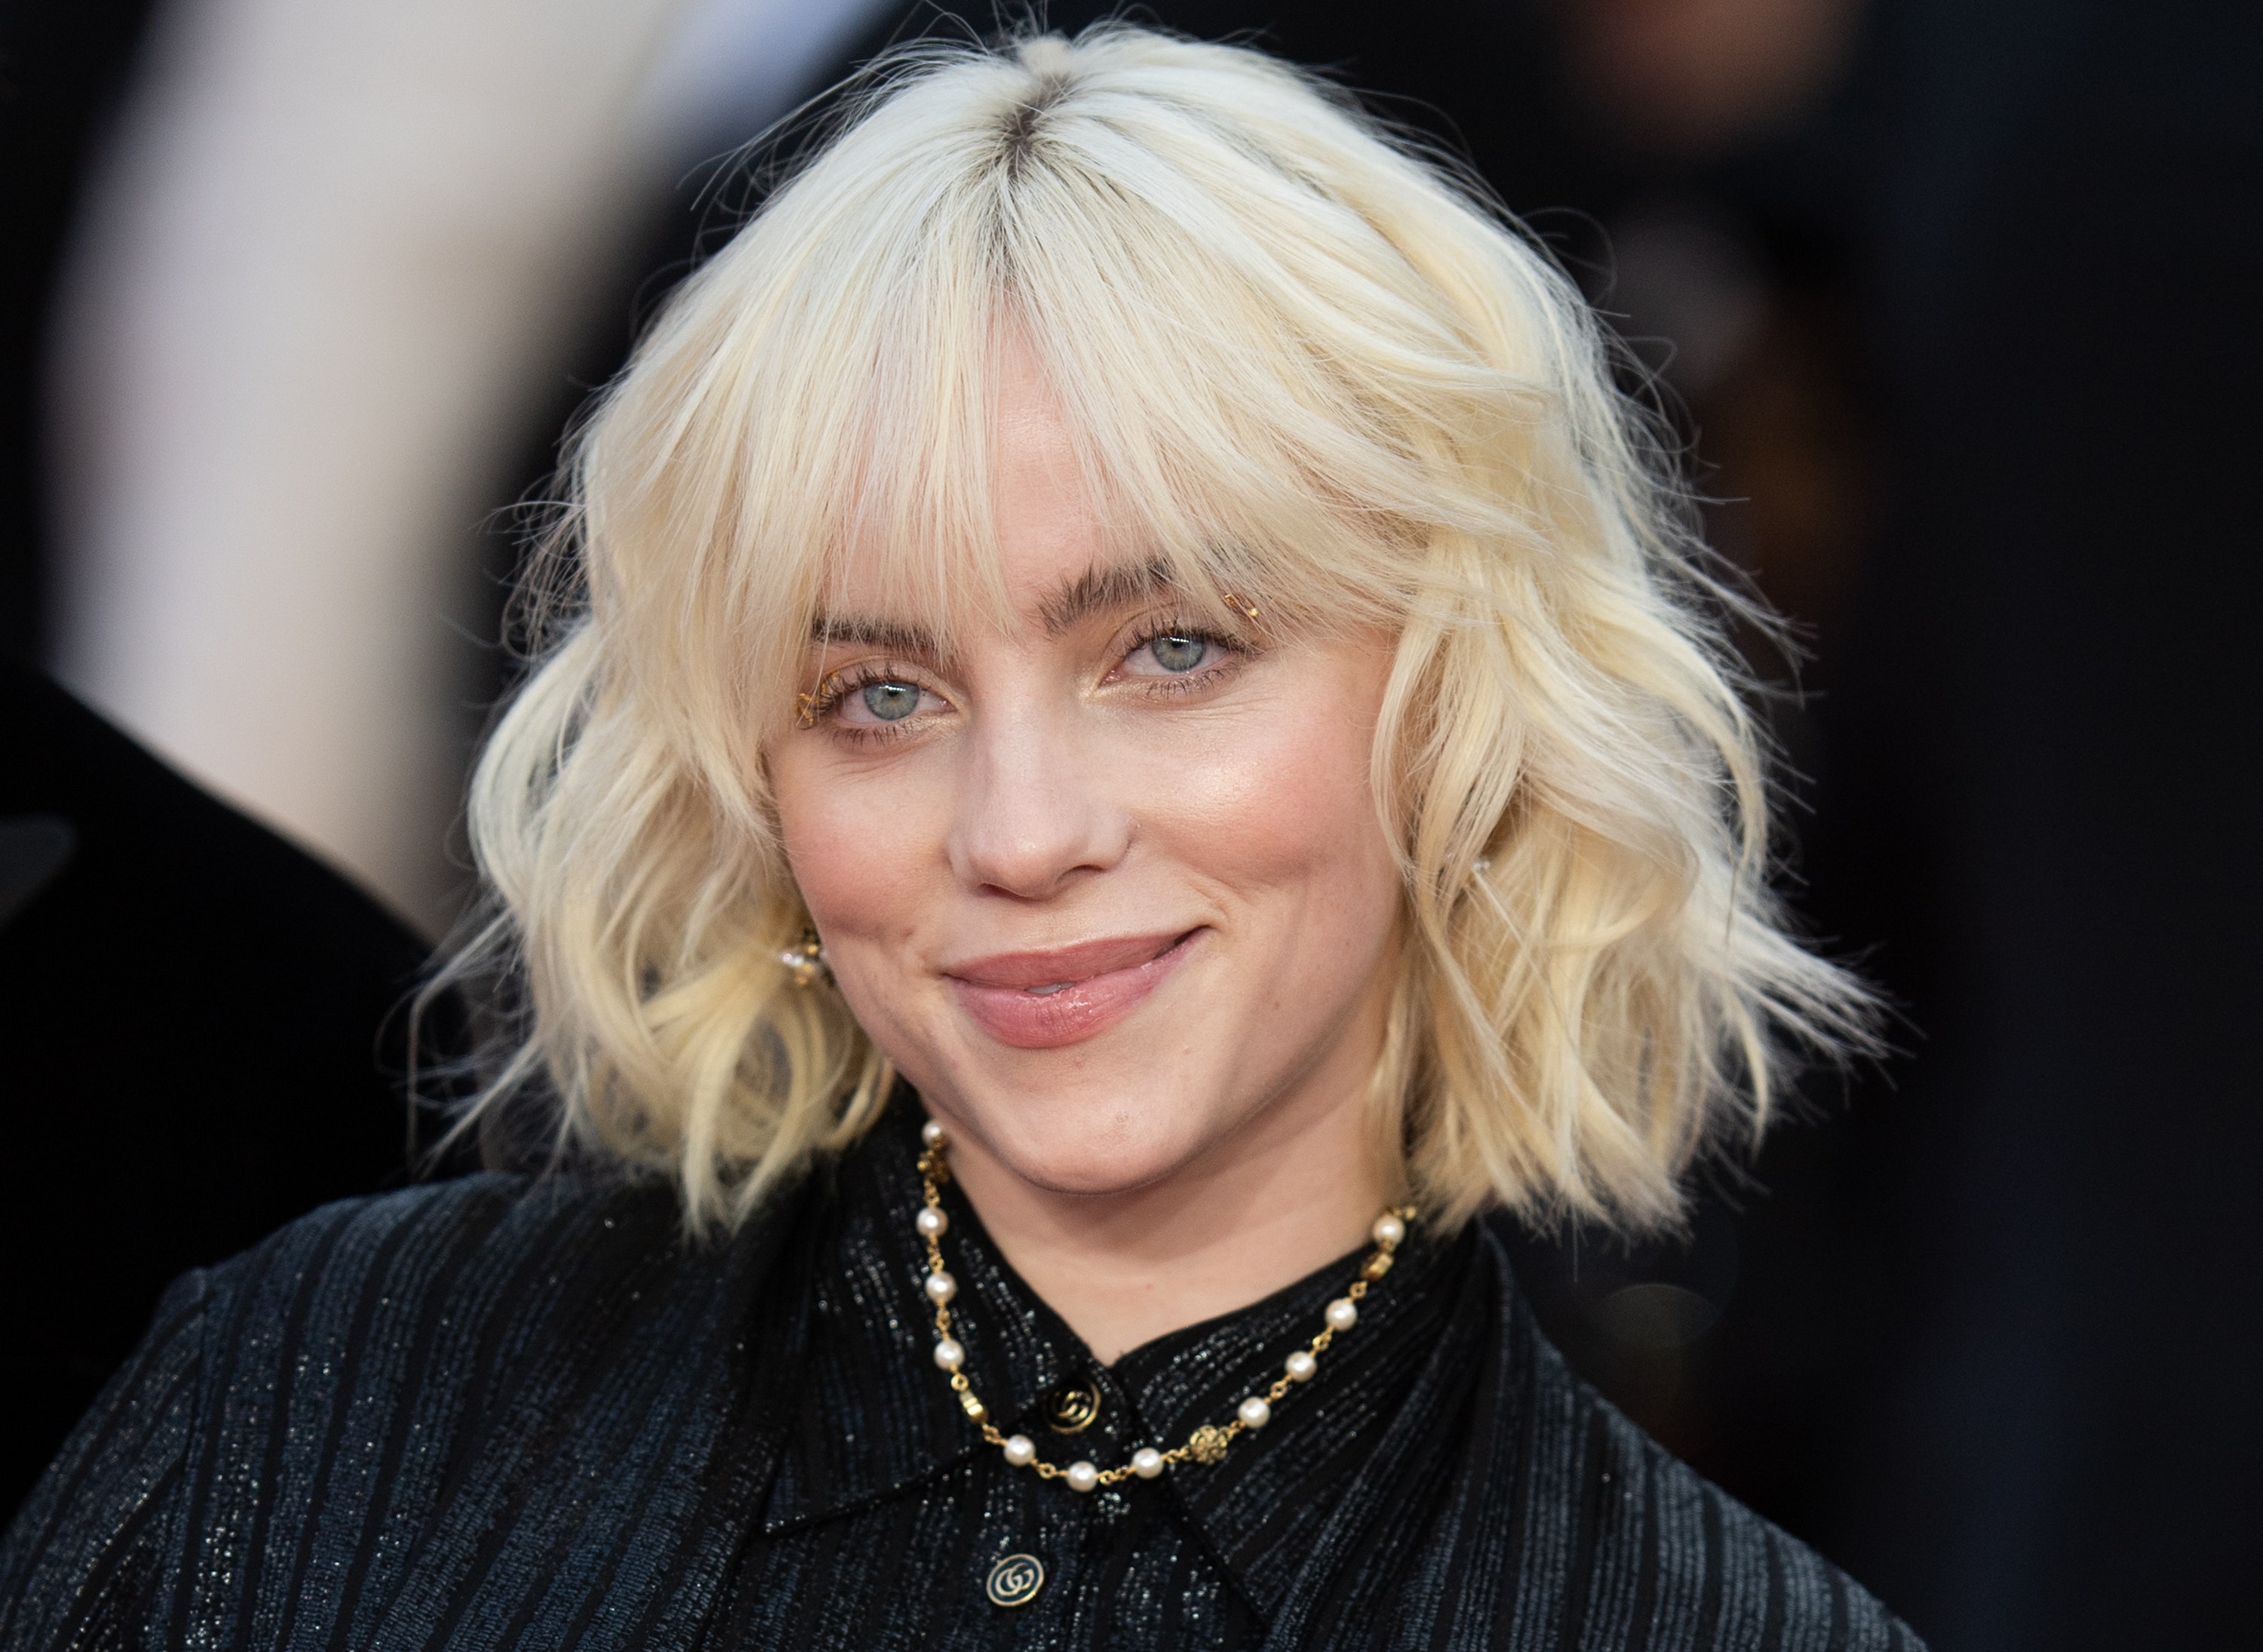 Billie Eilish's Blonde Hair Is the Perfect Summer Look - wide 2